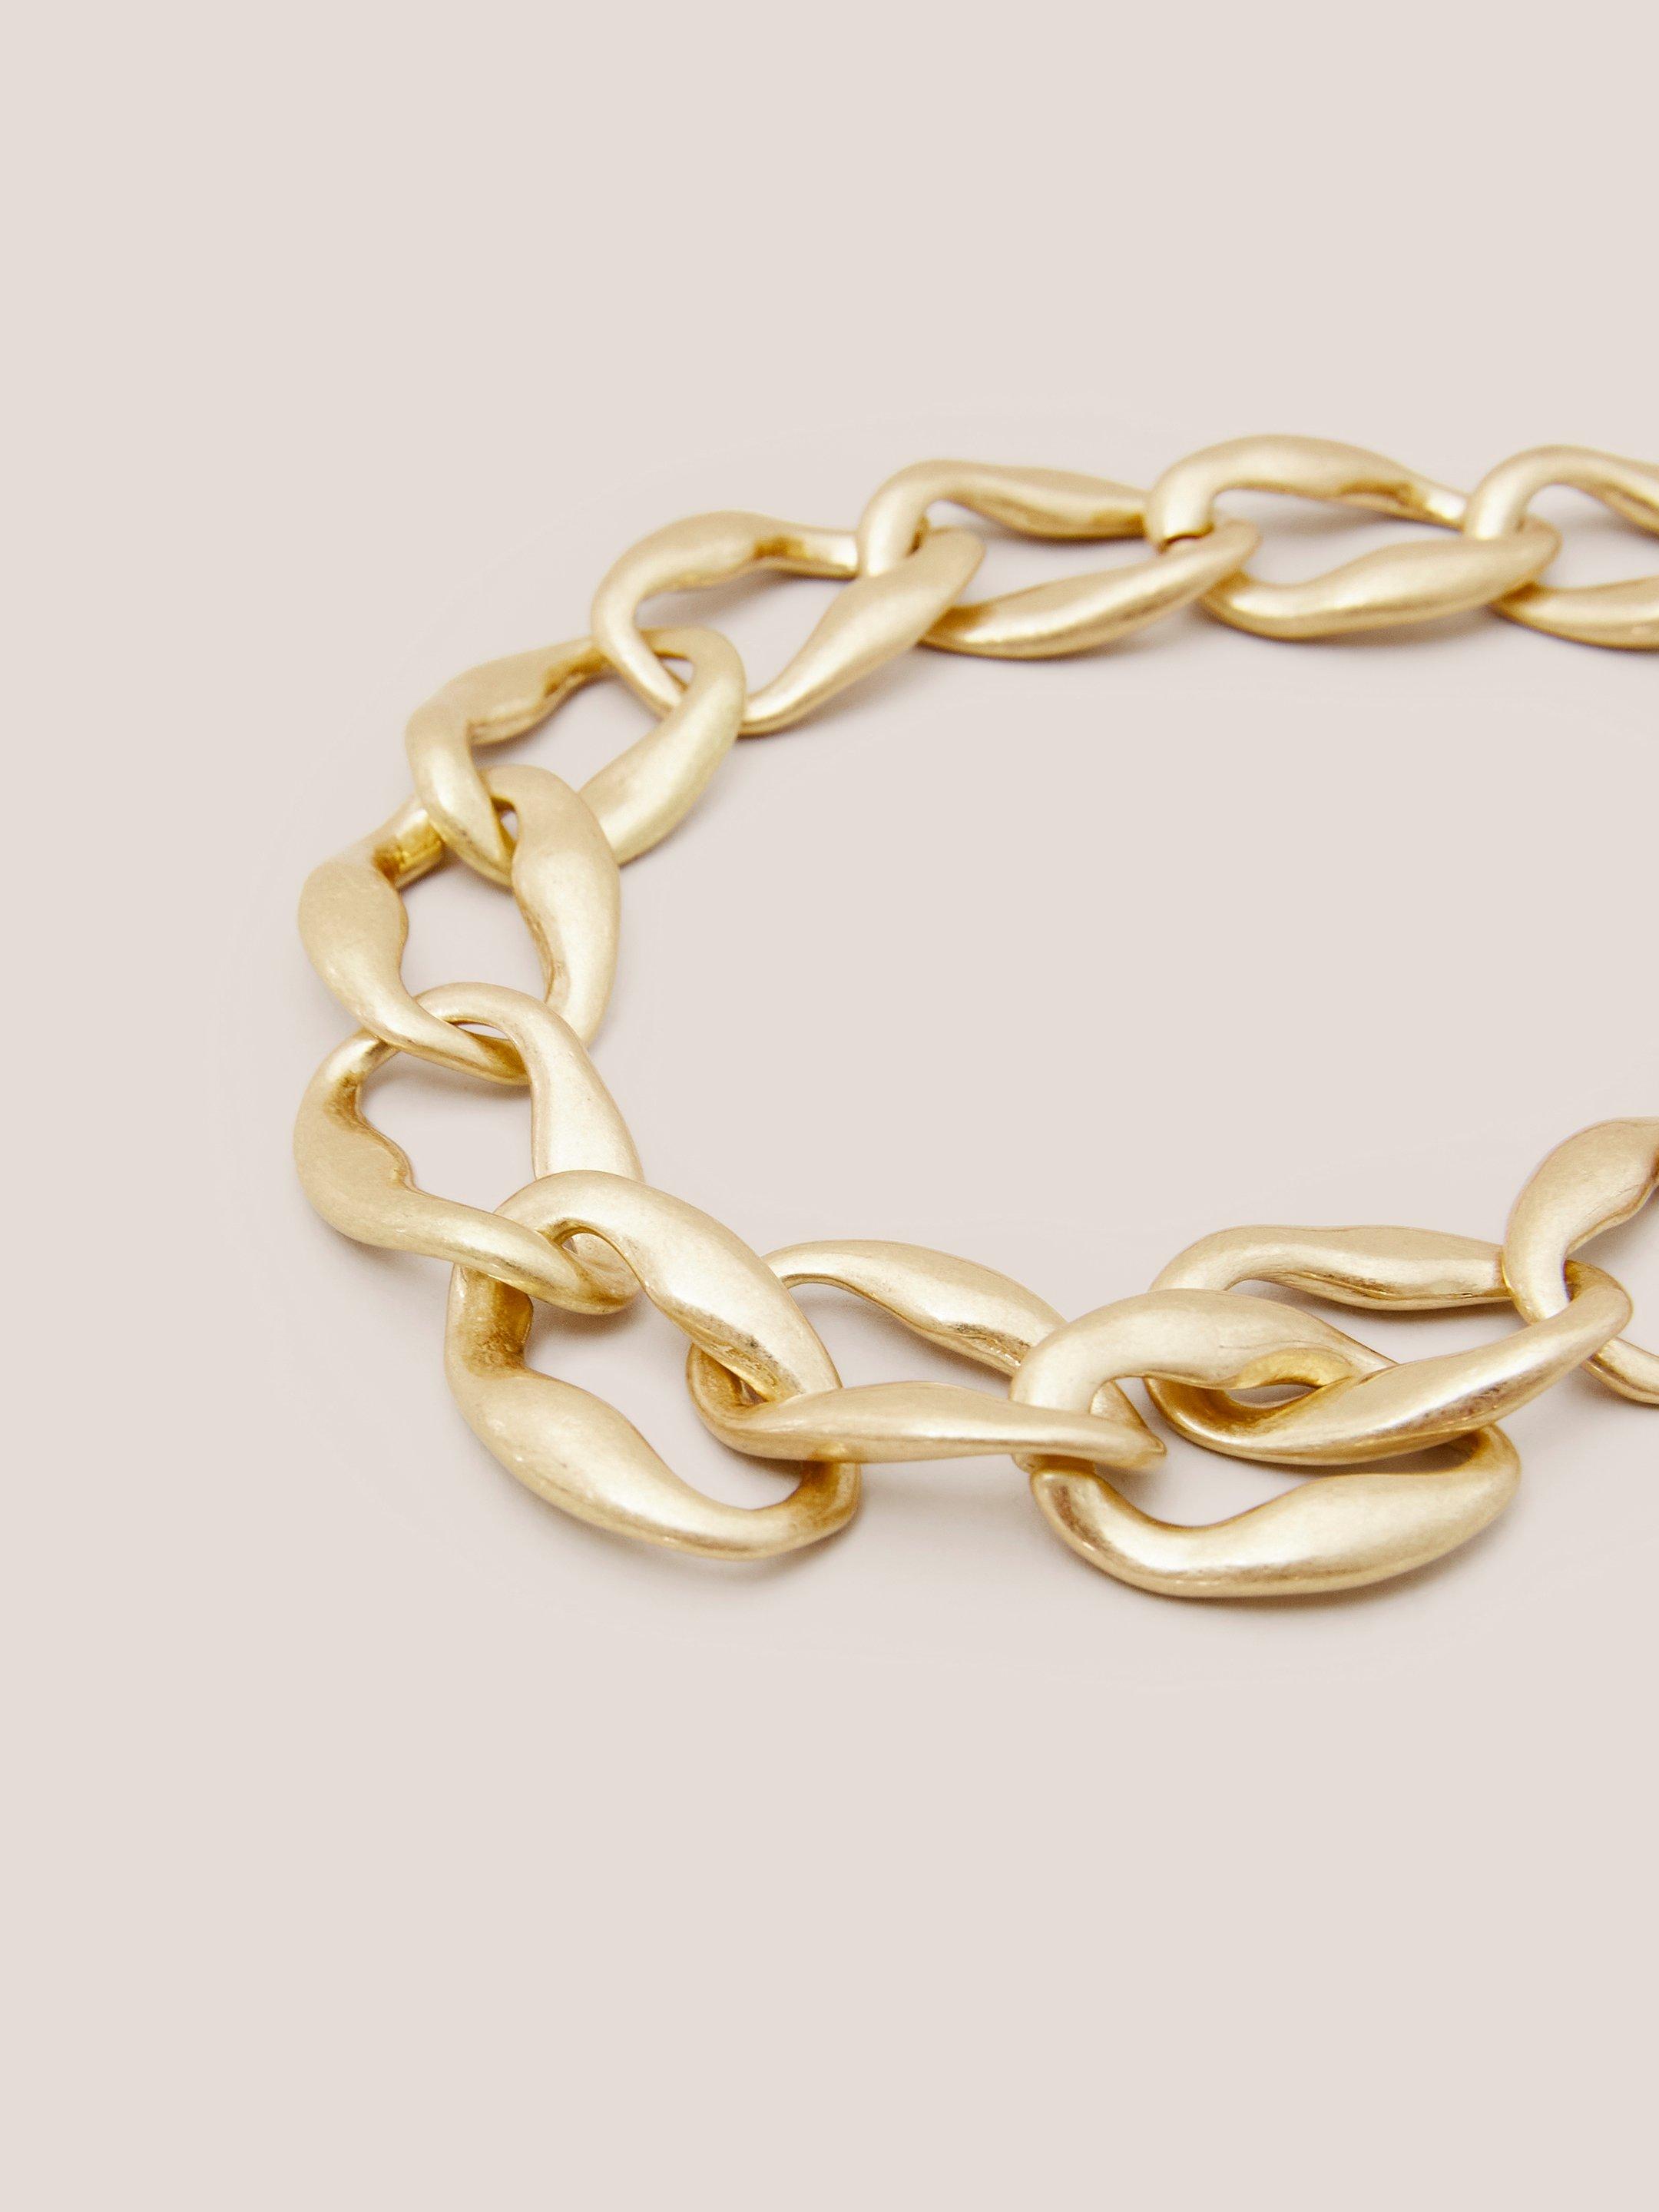 Giacinta Chain Necklace in GLD TN MET - FLAT DETAIL